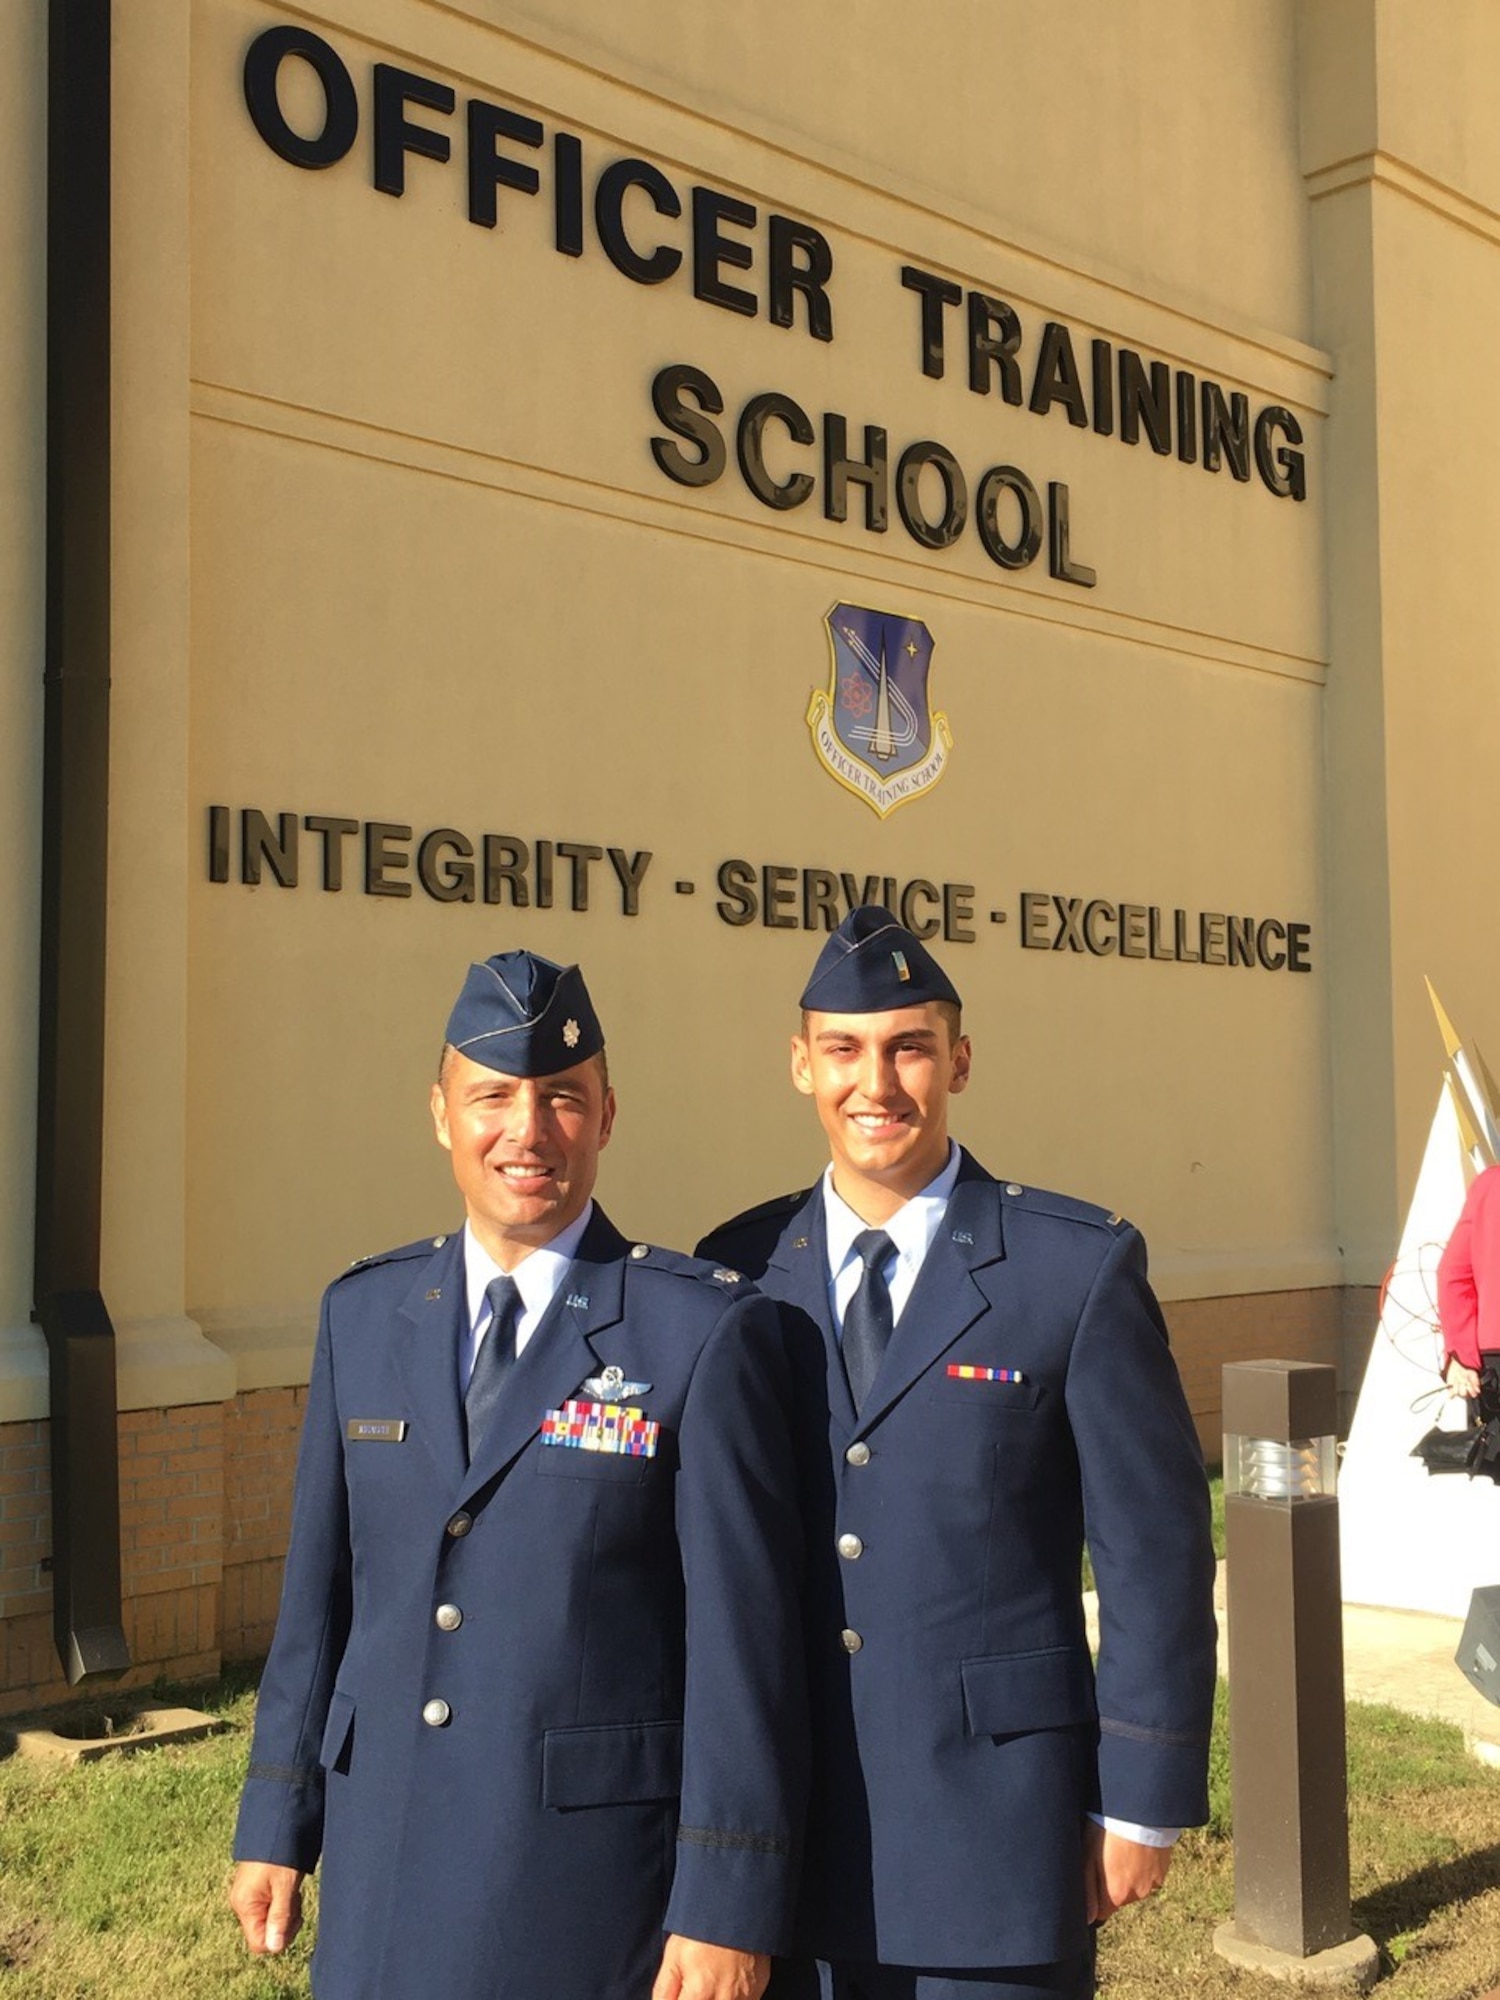 Lt. Col. Joe Mirarchi celebrates his son 2nd Lt. Chris Mirarchi’s completion of officer training school and commissioning.